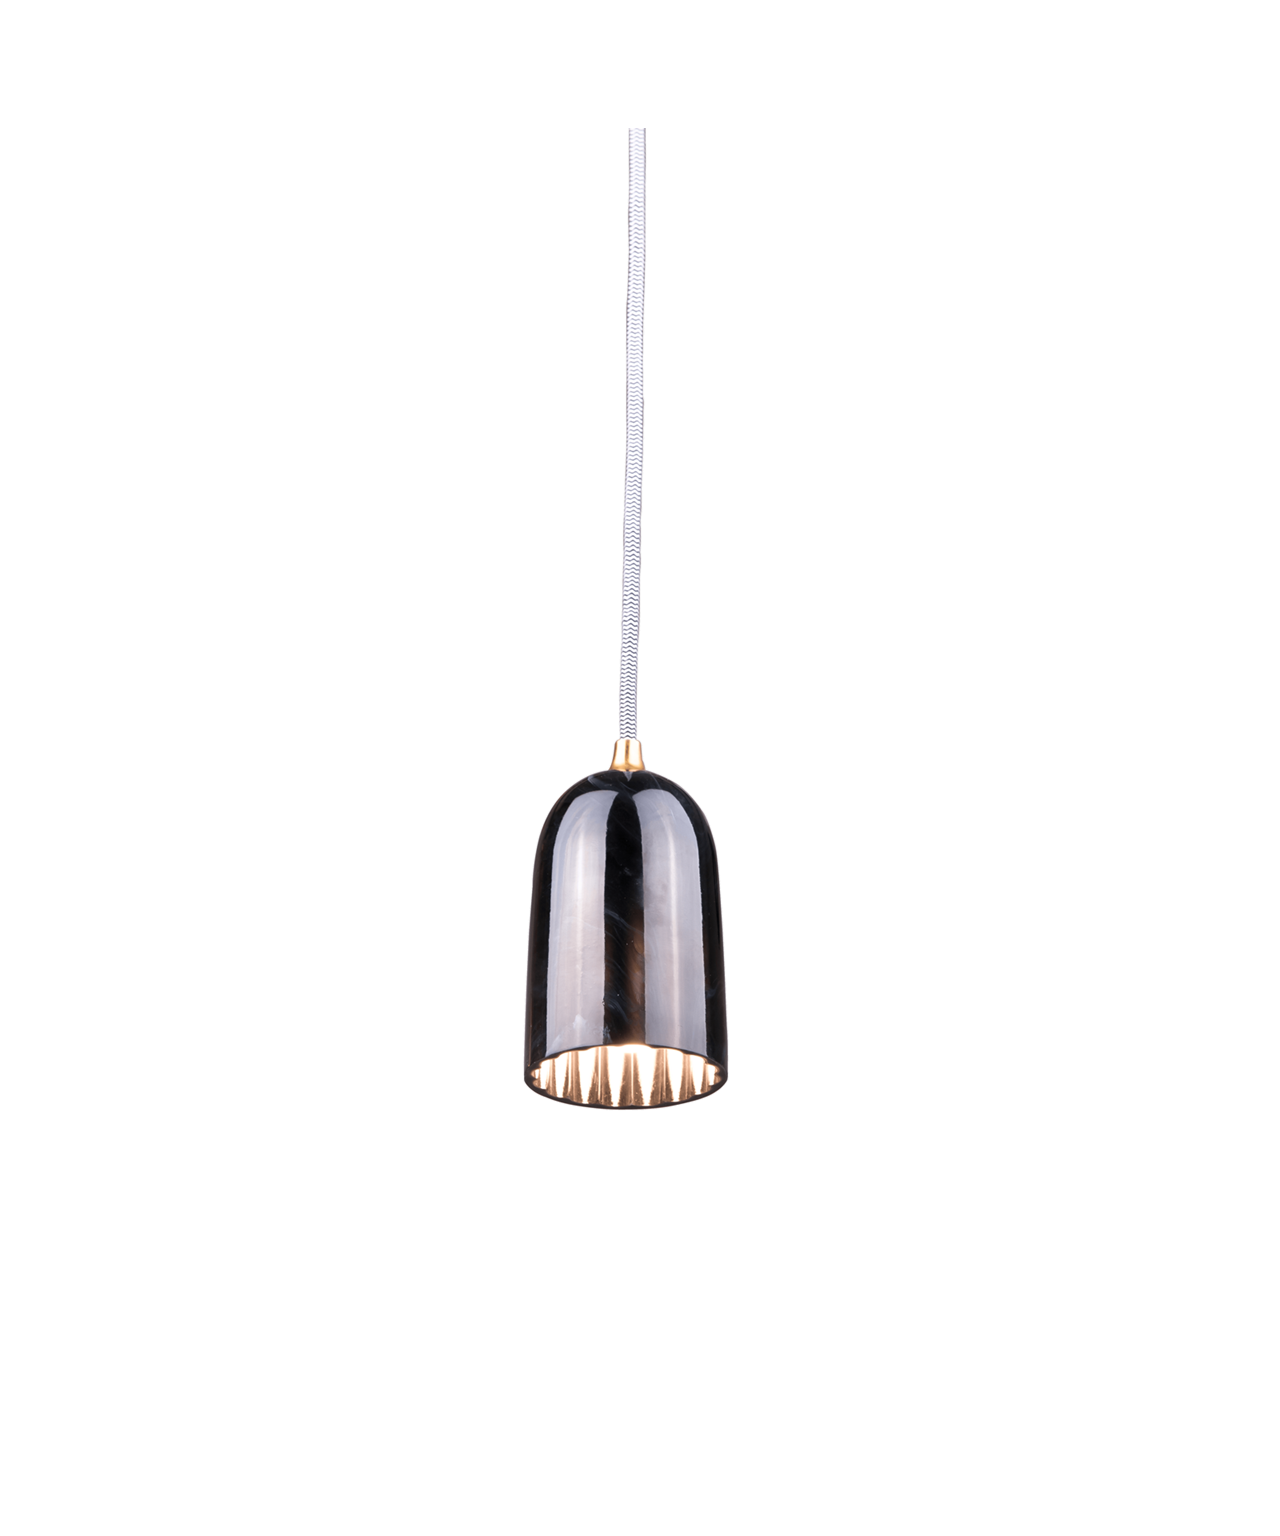 Innermost - Doric 8 Hanglamp Polished Black Marble